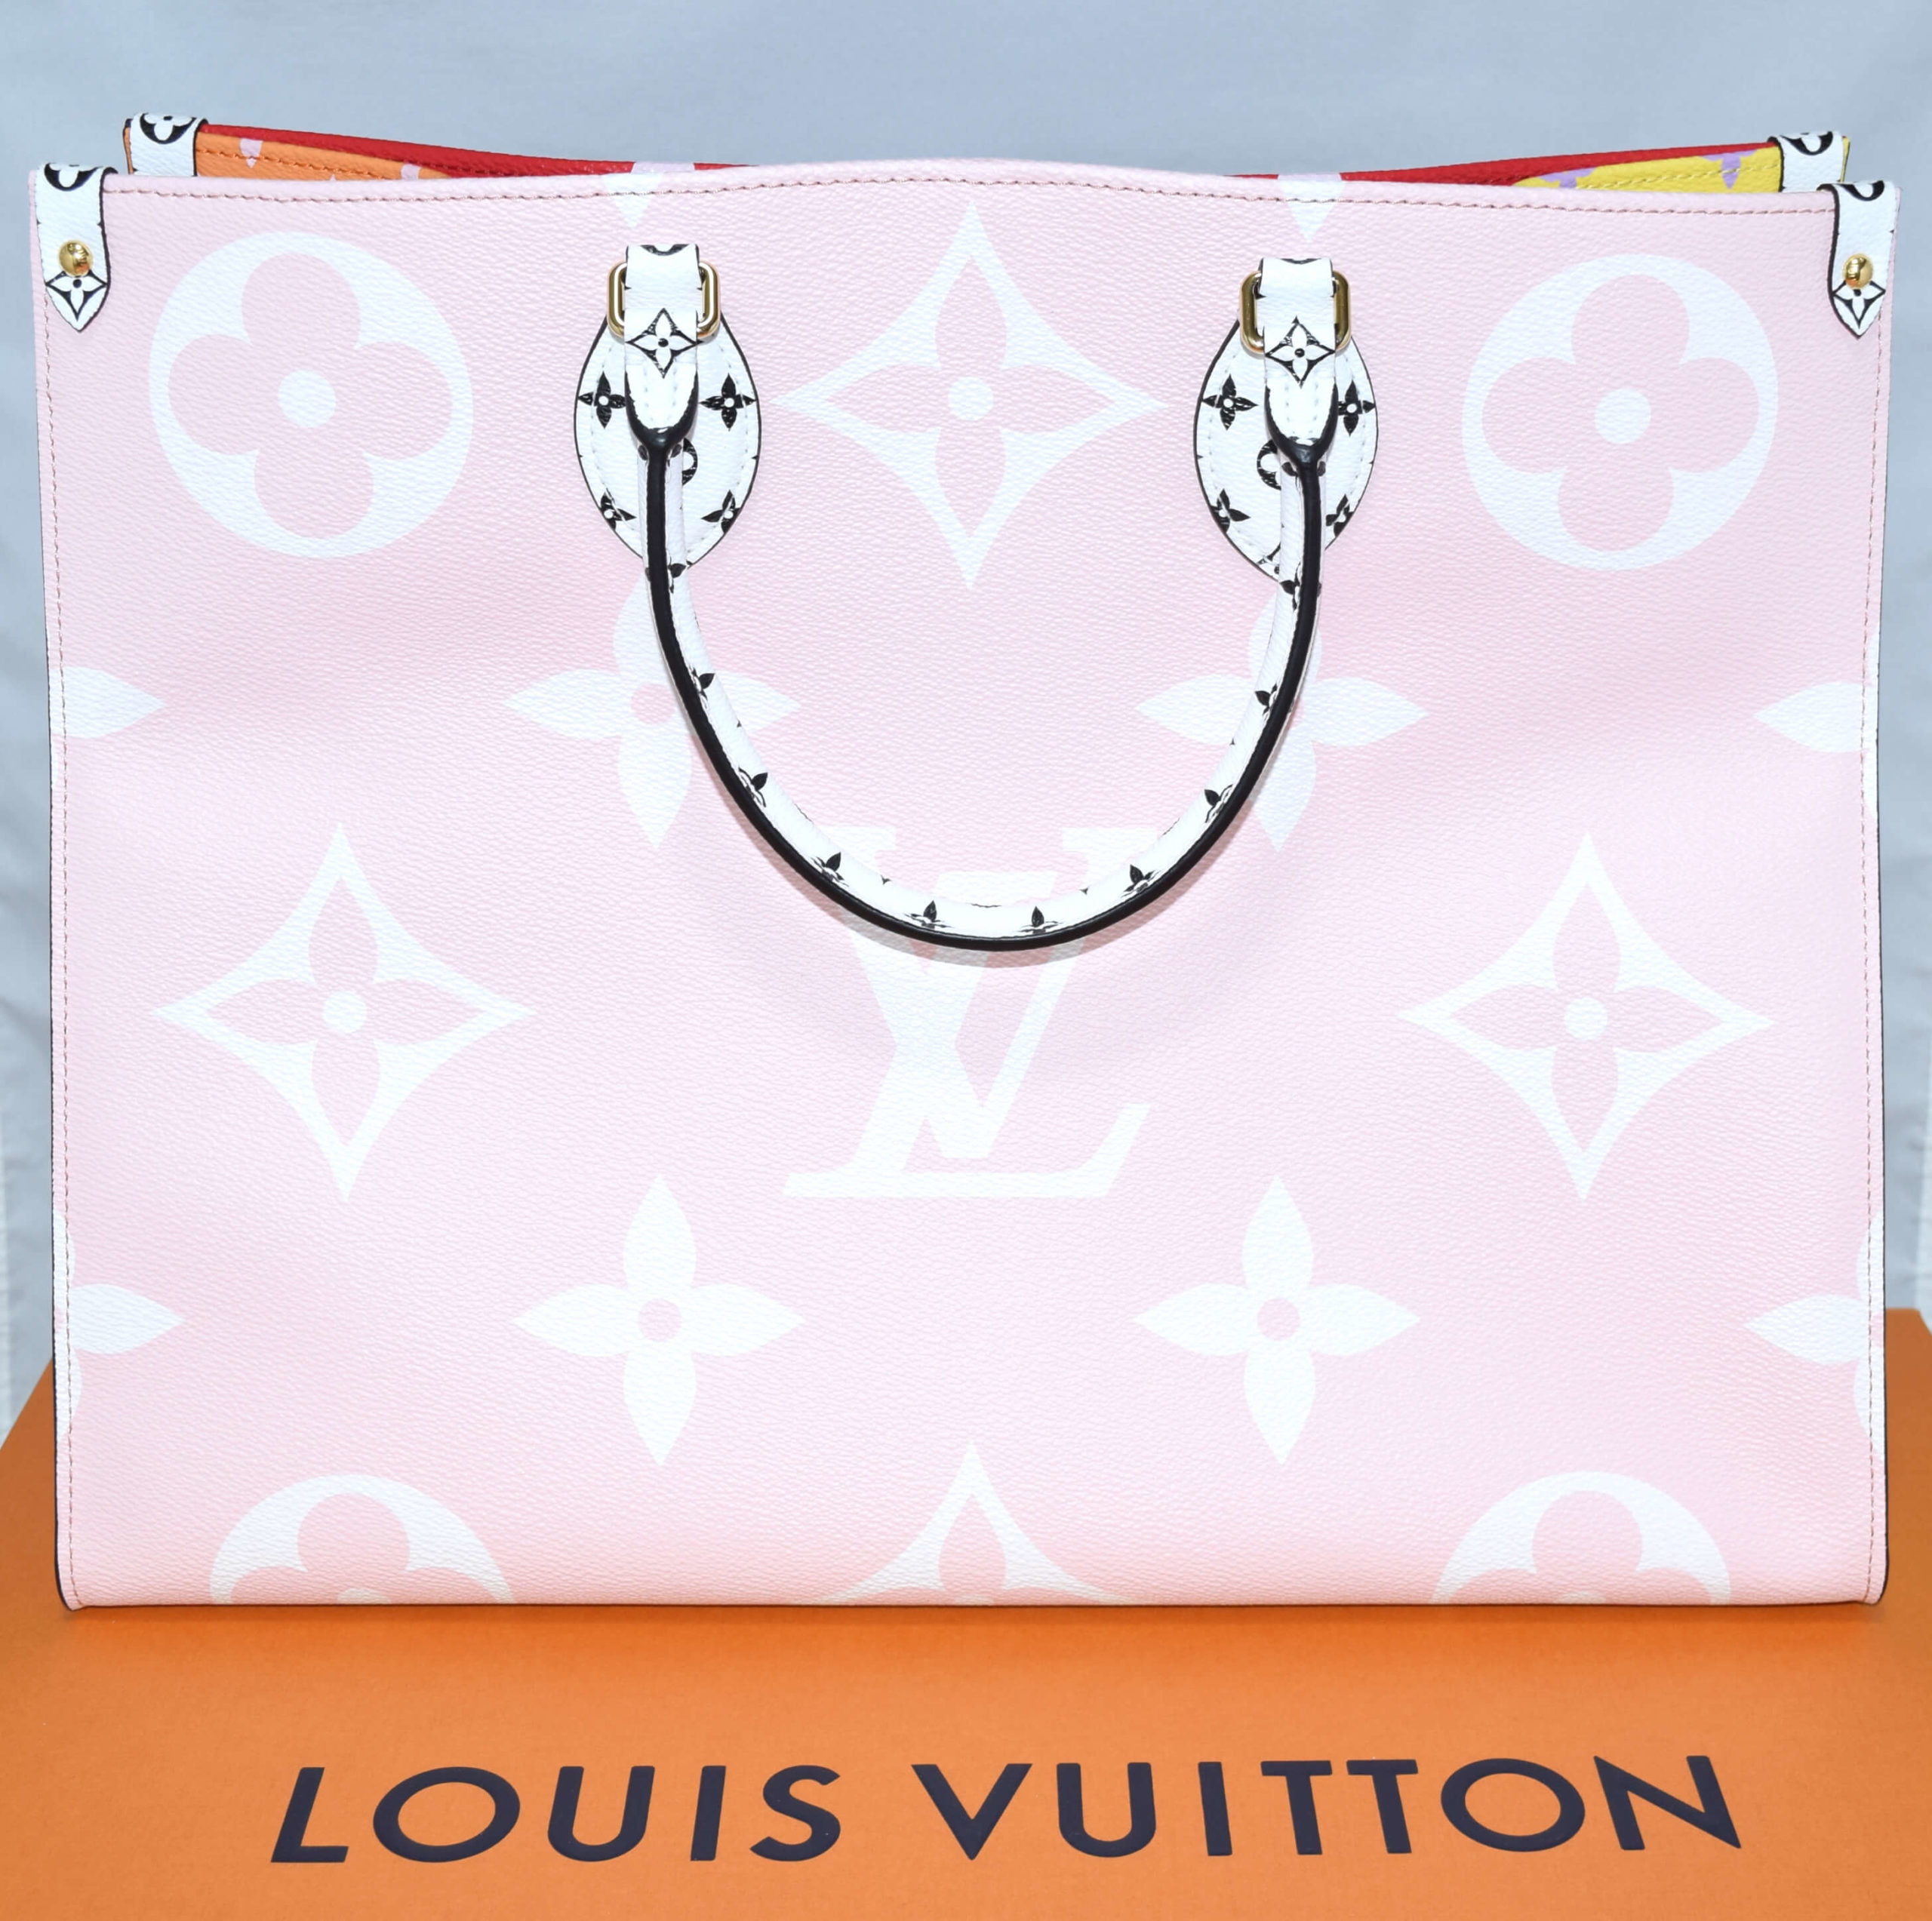 lv on the go tote pink